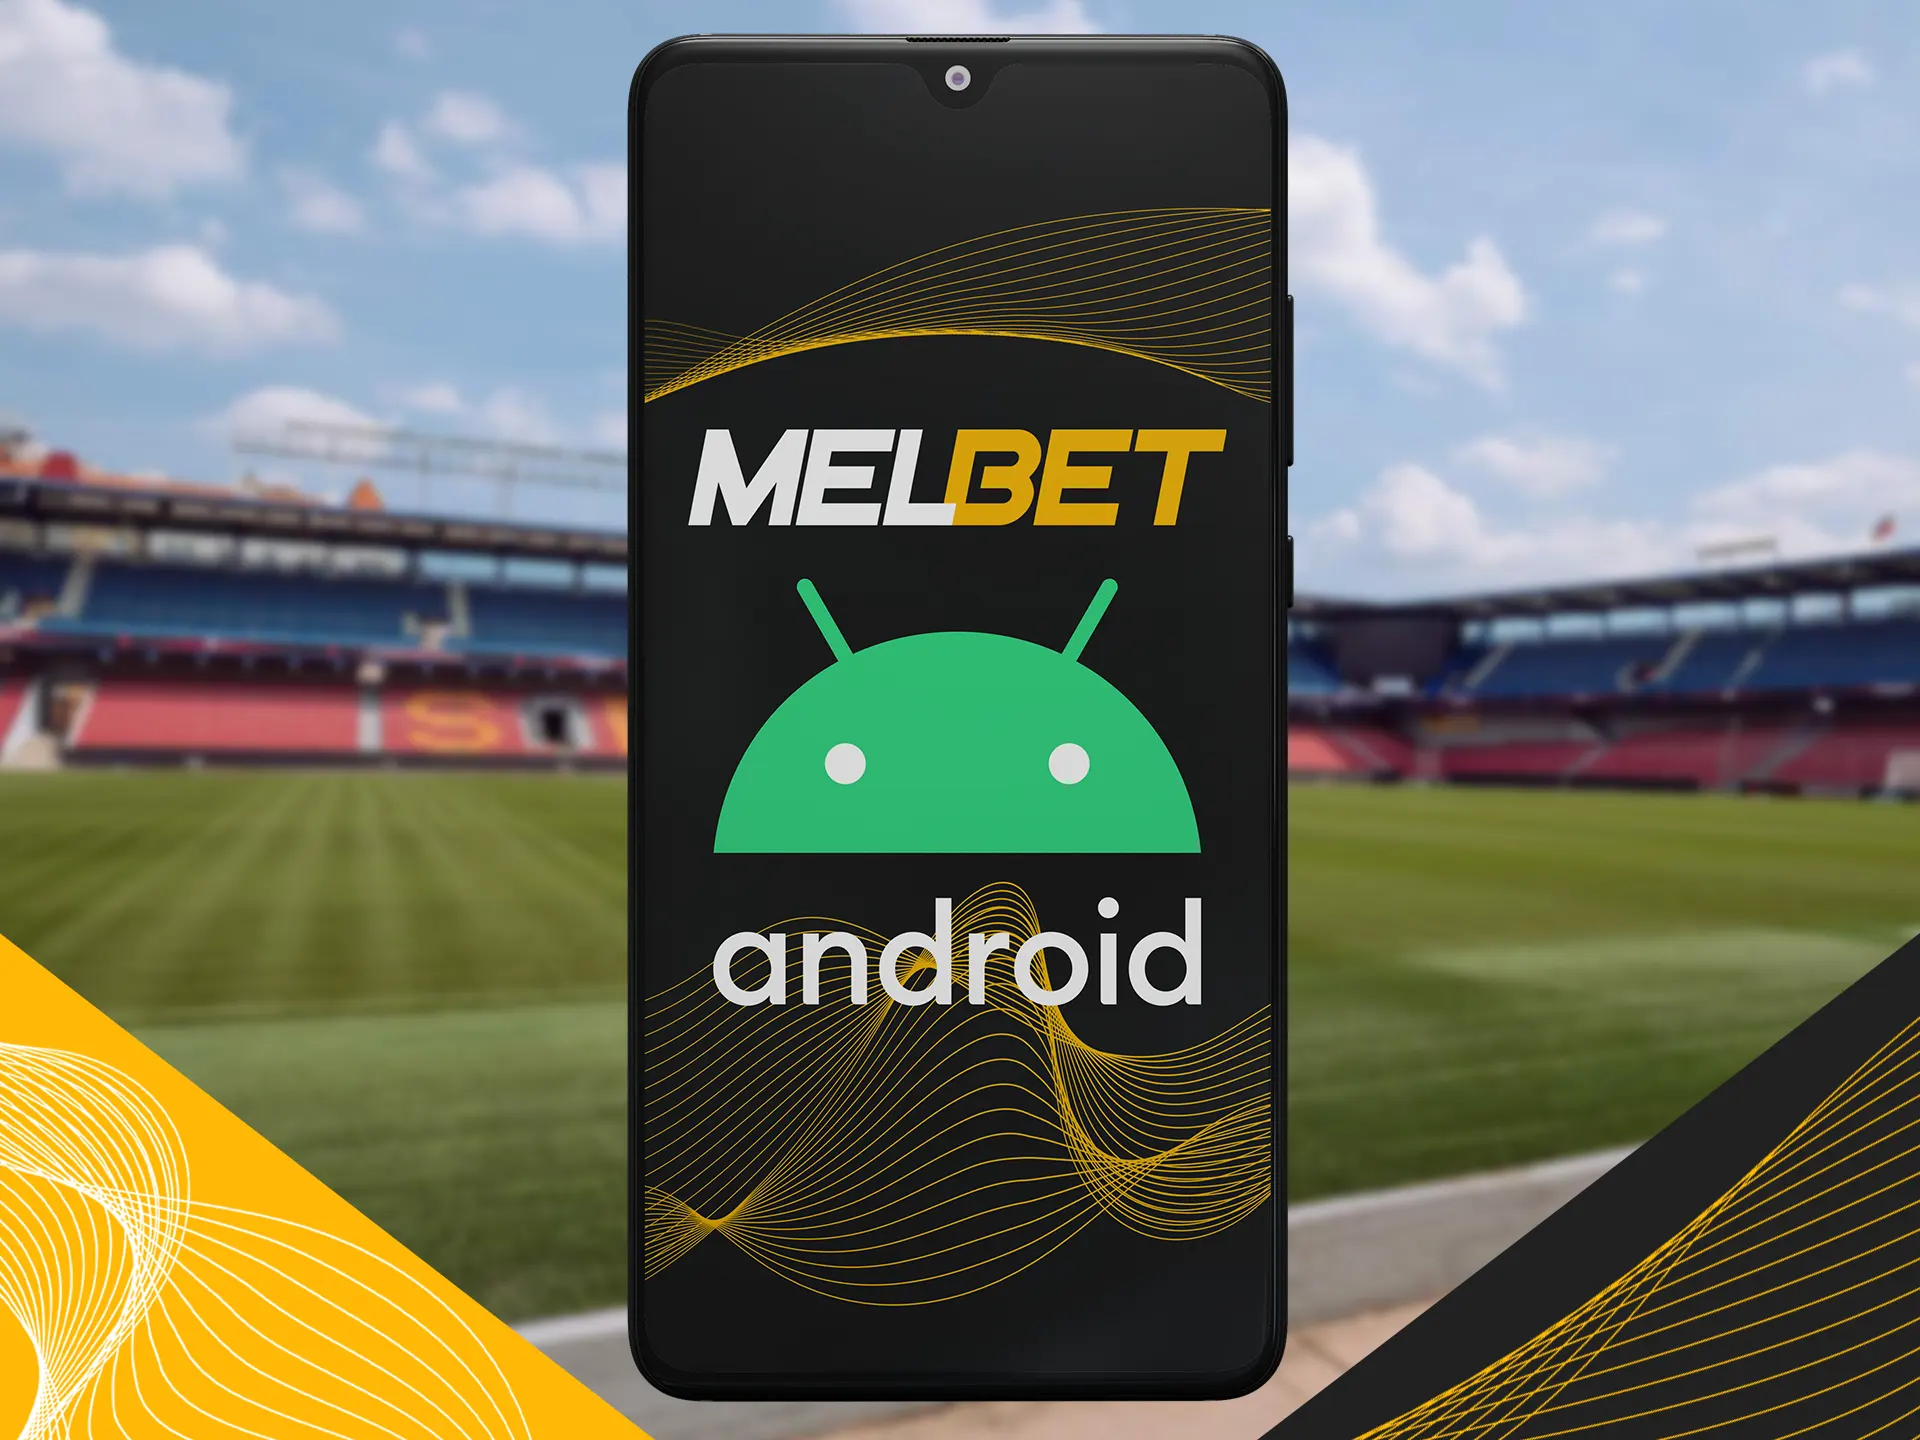 Bet using Melbet app in any place.